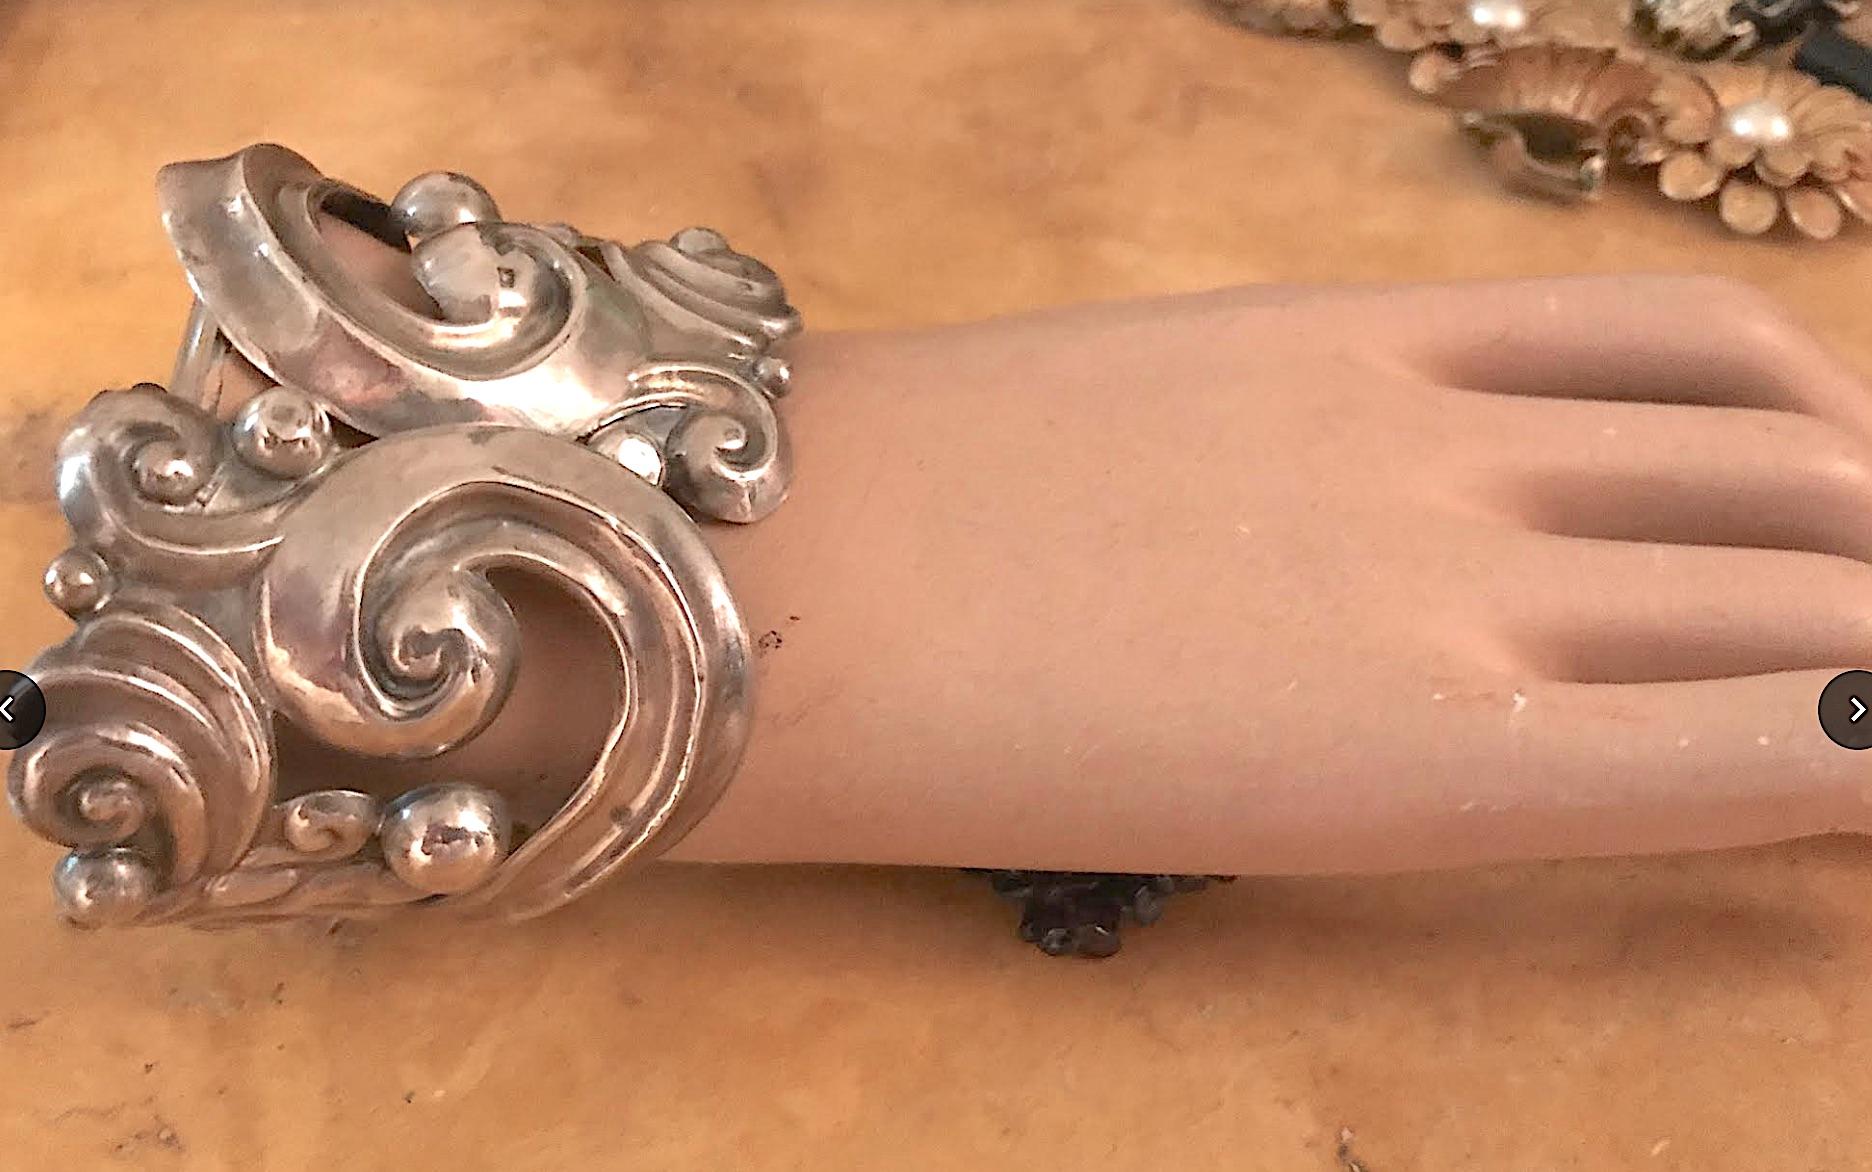 Superb Rare Mexico Sterling Silver Clamper Bracelet c. 1940s by Antonio Pineda For Sale 1